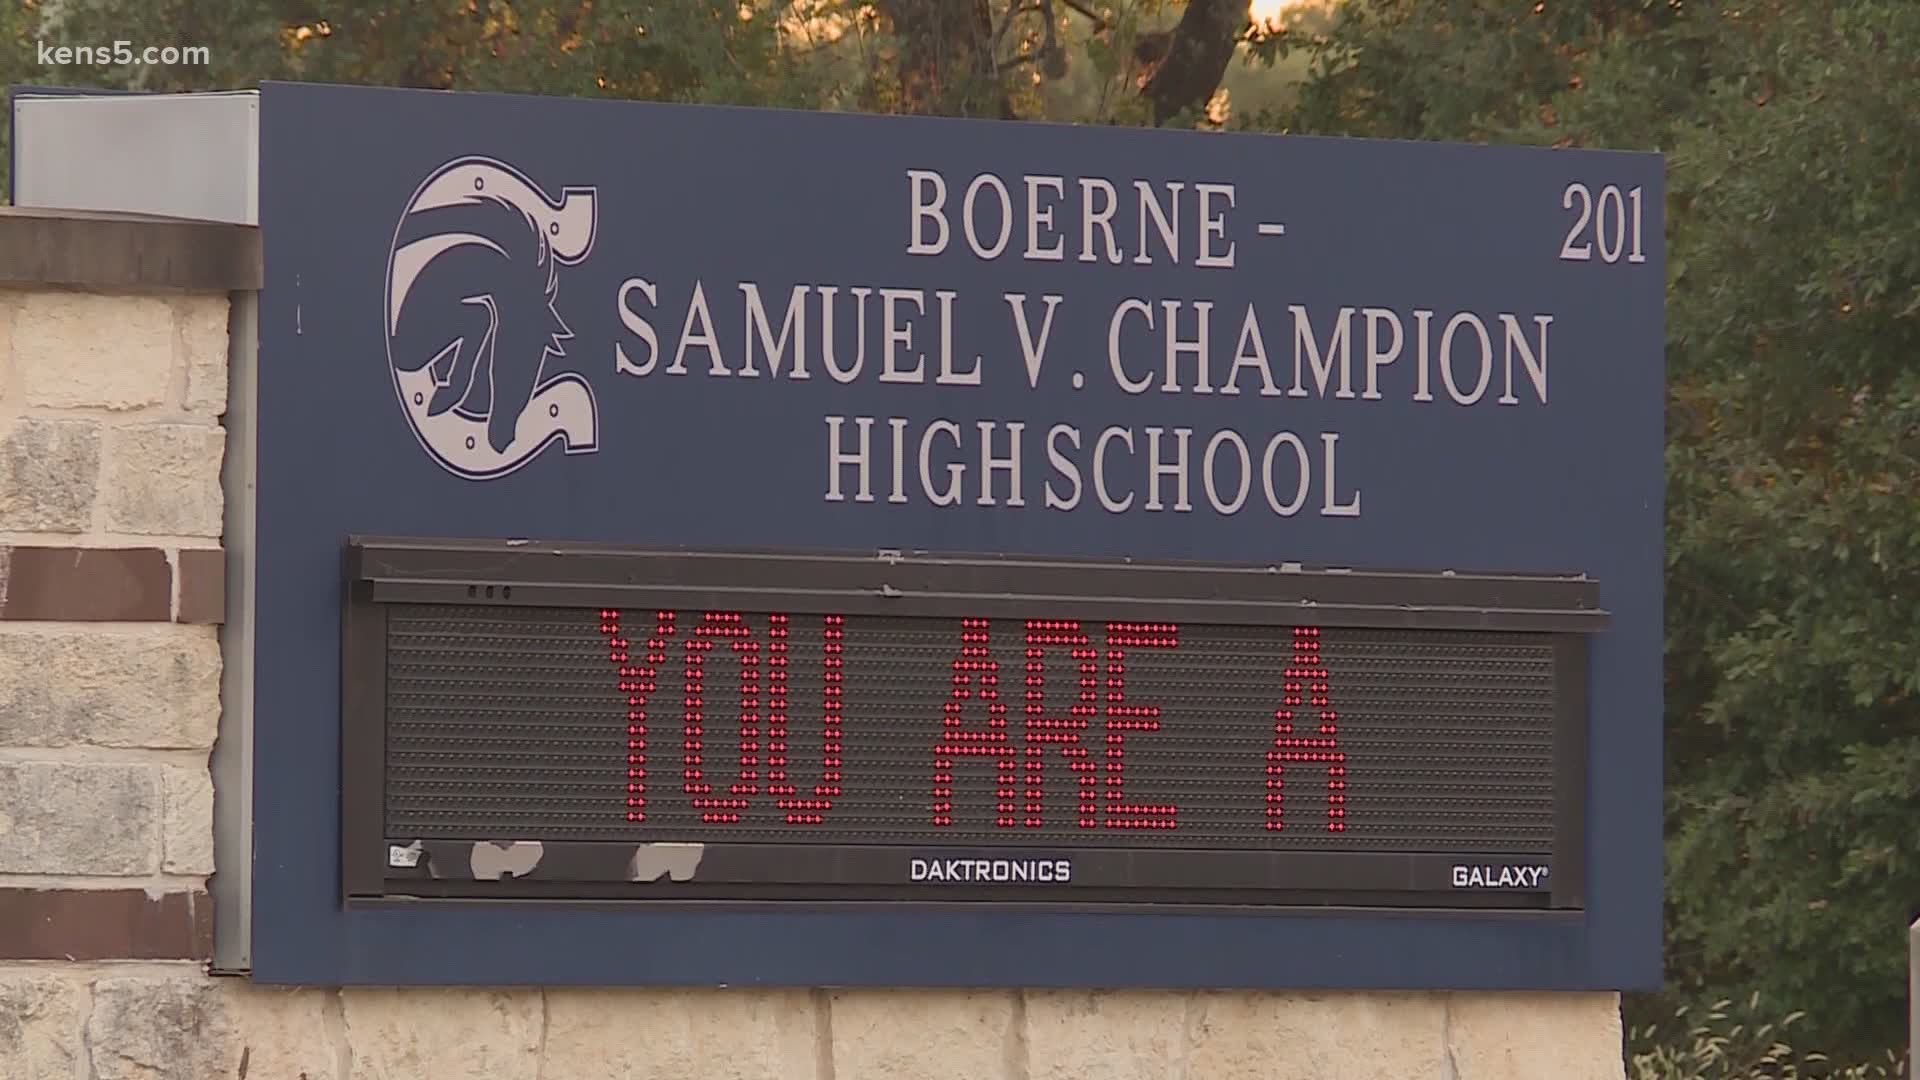 School just started Wednesday. The first case was reported at Champion High School.